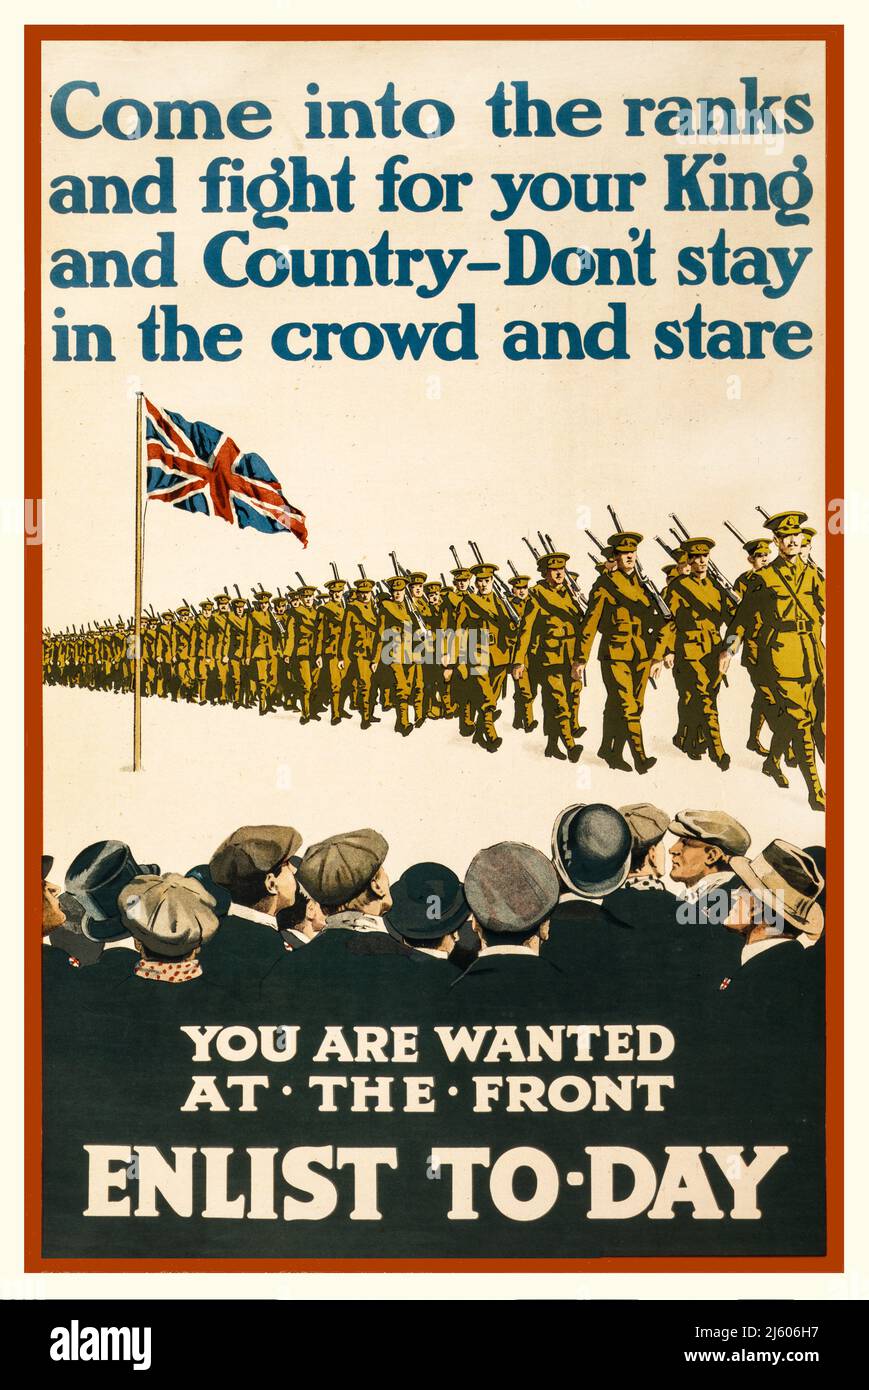 A British advertising recruitment poster from 1915 with the slogan,  Come into the ranks and fight for your king and country - don't stay in the crowd and stare. You are wanted at the front. Enlist to-day. Poster showing men, some wearing the Union Jack on their lapels, watching as soldiers march passed. Artist unknown. Stock Photo